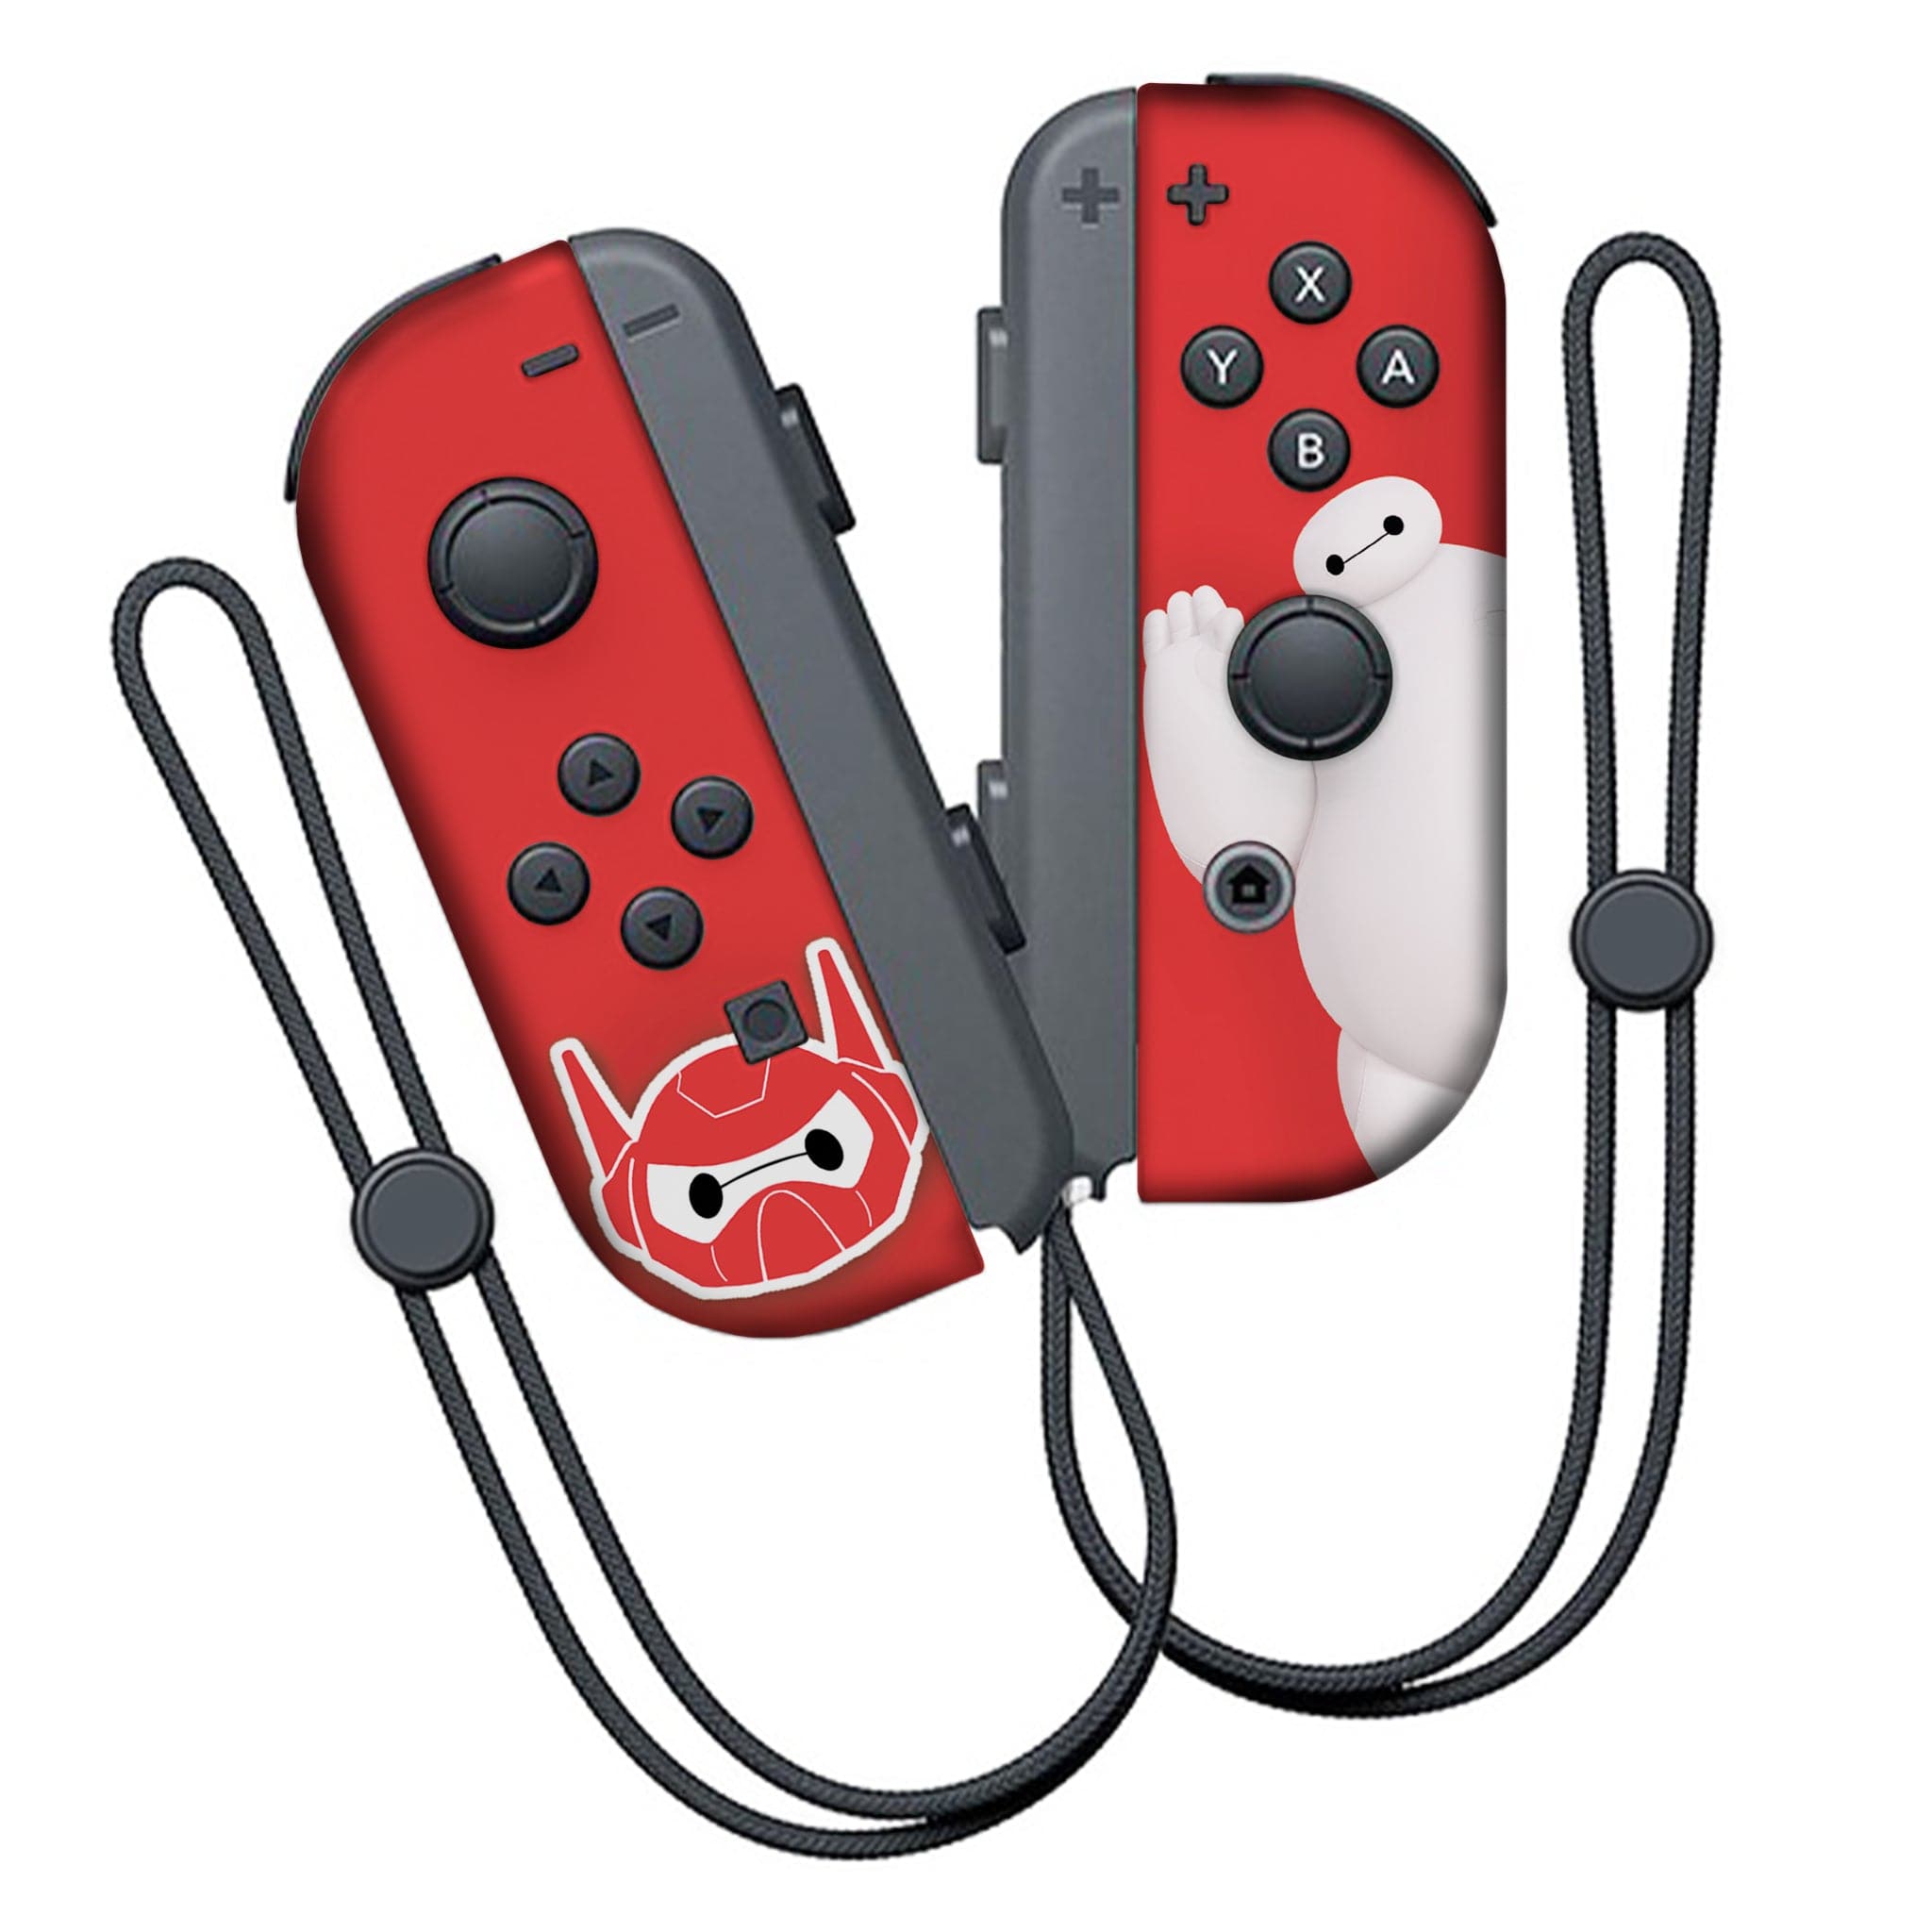 BIG HERO 6 BAYMAX Inspired Nintendo Switch Joy-Con Left and Right Switch Controllers by Nintendo